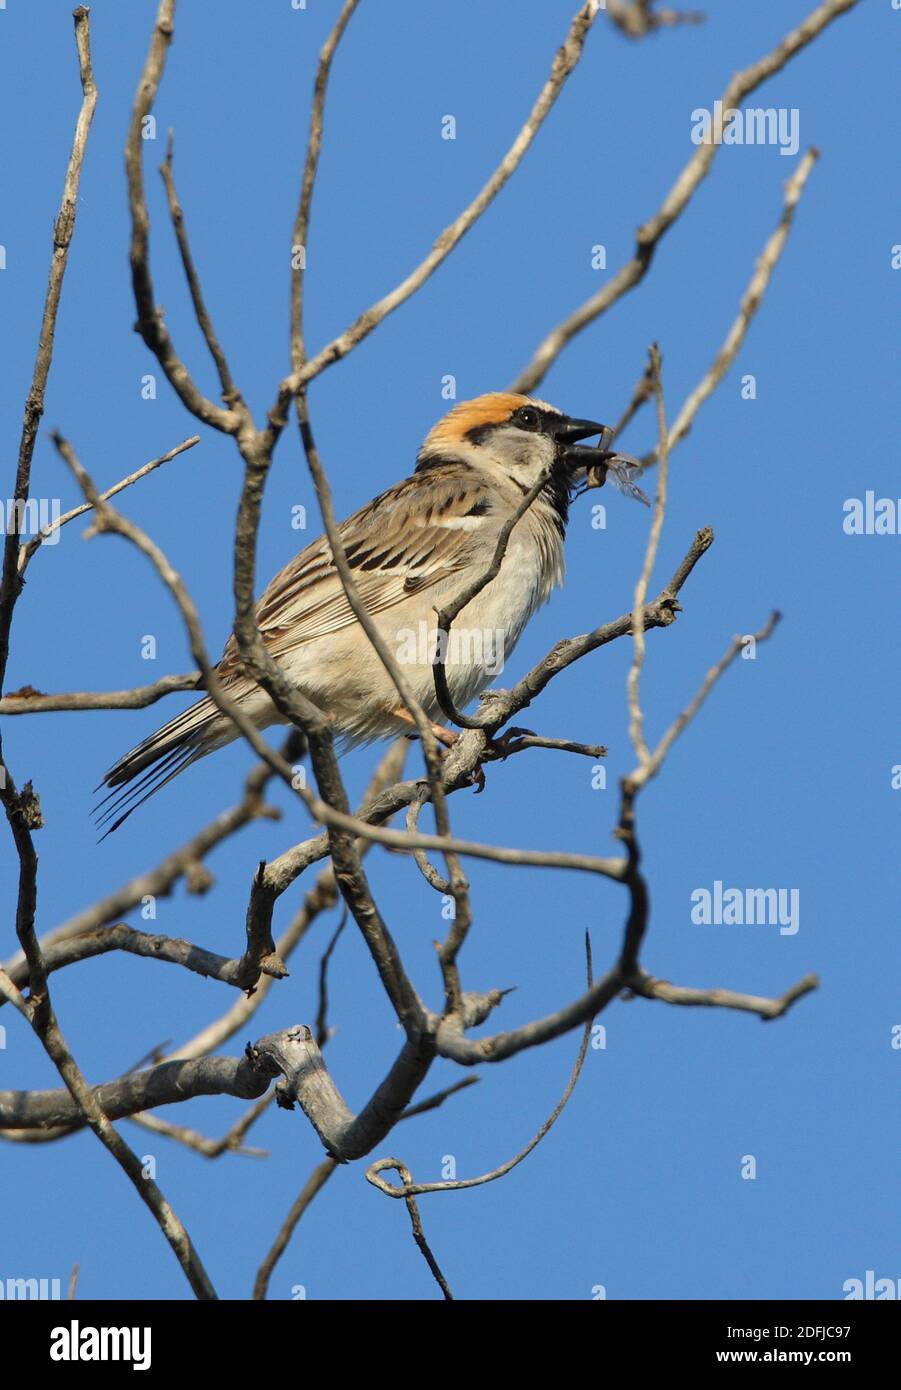 Saxaul Sparrow (Passer ammodendri nigricans) adult perched in tree, with insect in bill, calling  Almaty province, Kazakhstan         June Stock Photo